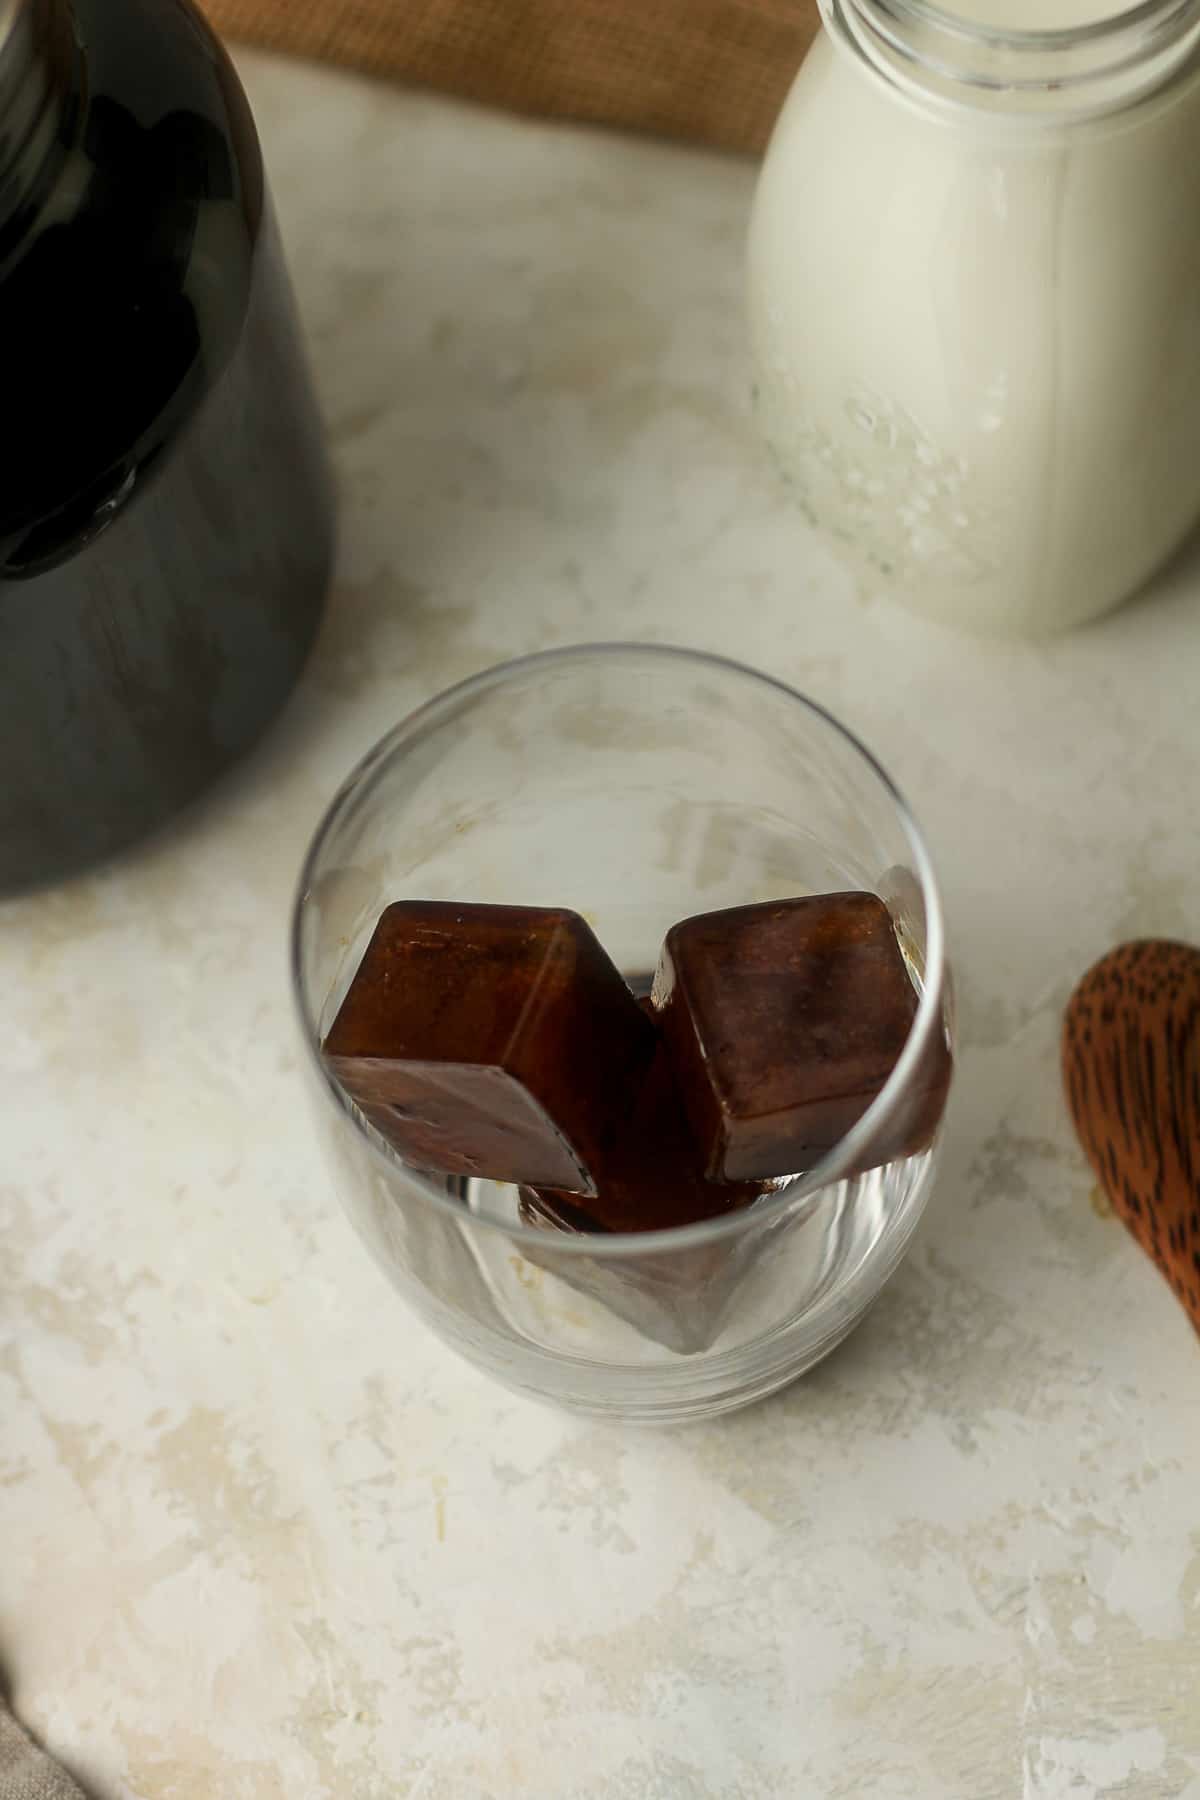 A glass with three small coffee cubes.